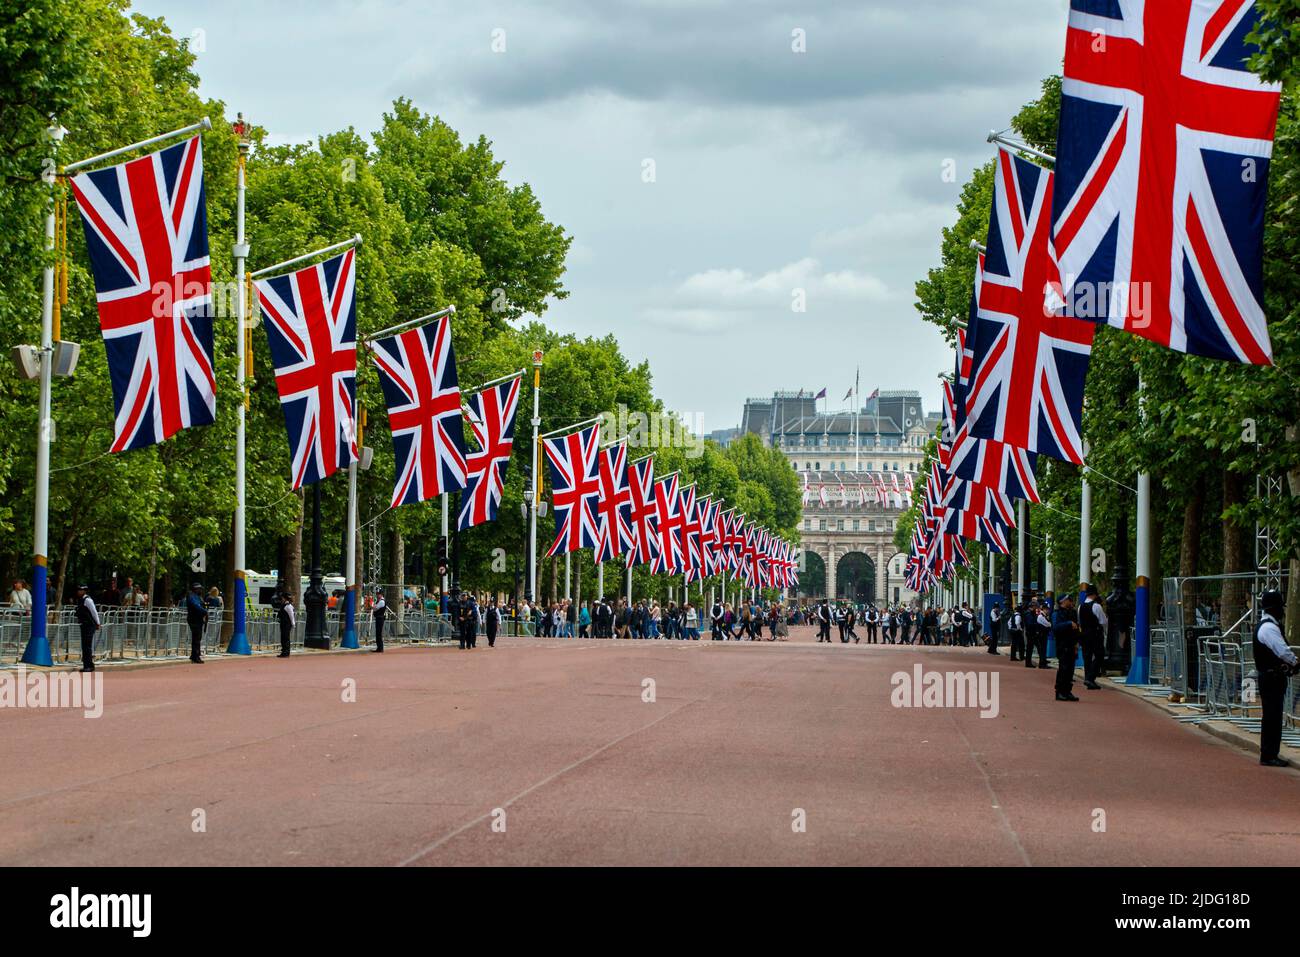 Trooping the Colour Rehearsals, The Mall, London England, United KingdomSaturday, May 21, 2022.Photo: David Rowland / One-Image.com Stock Photo